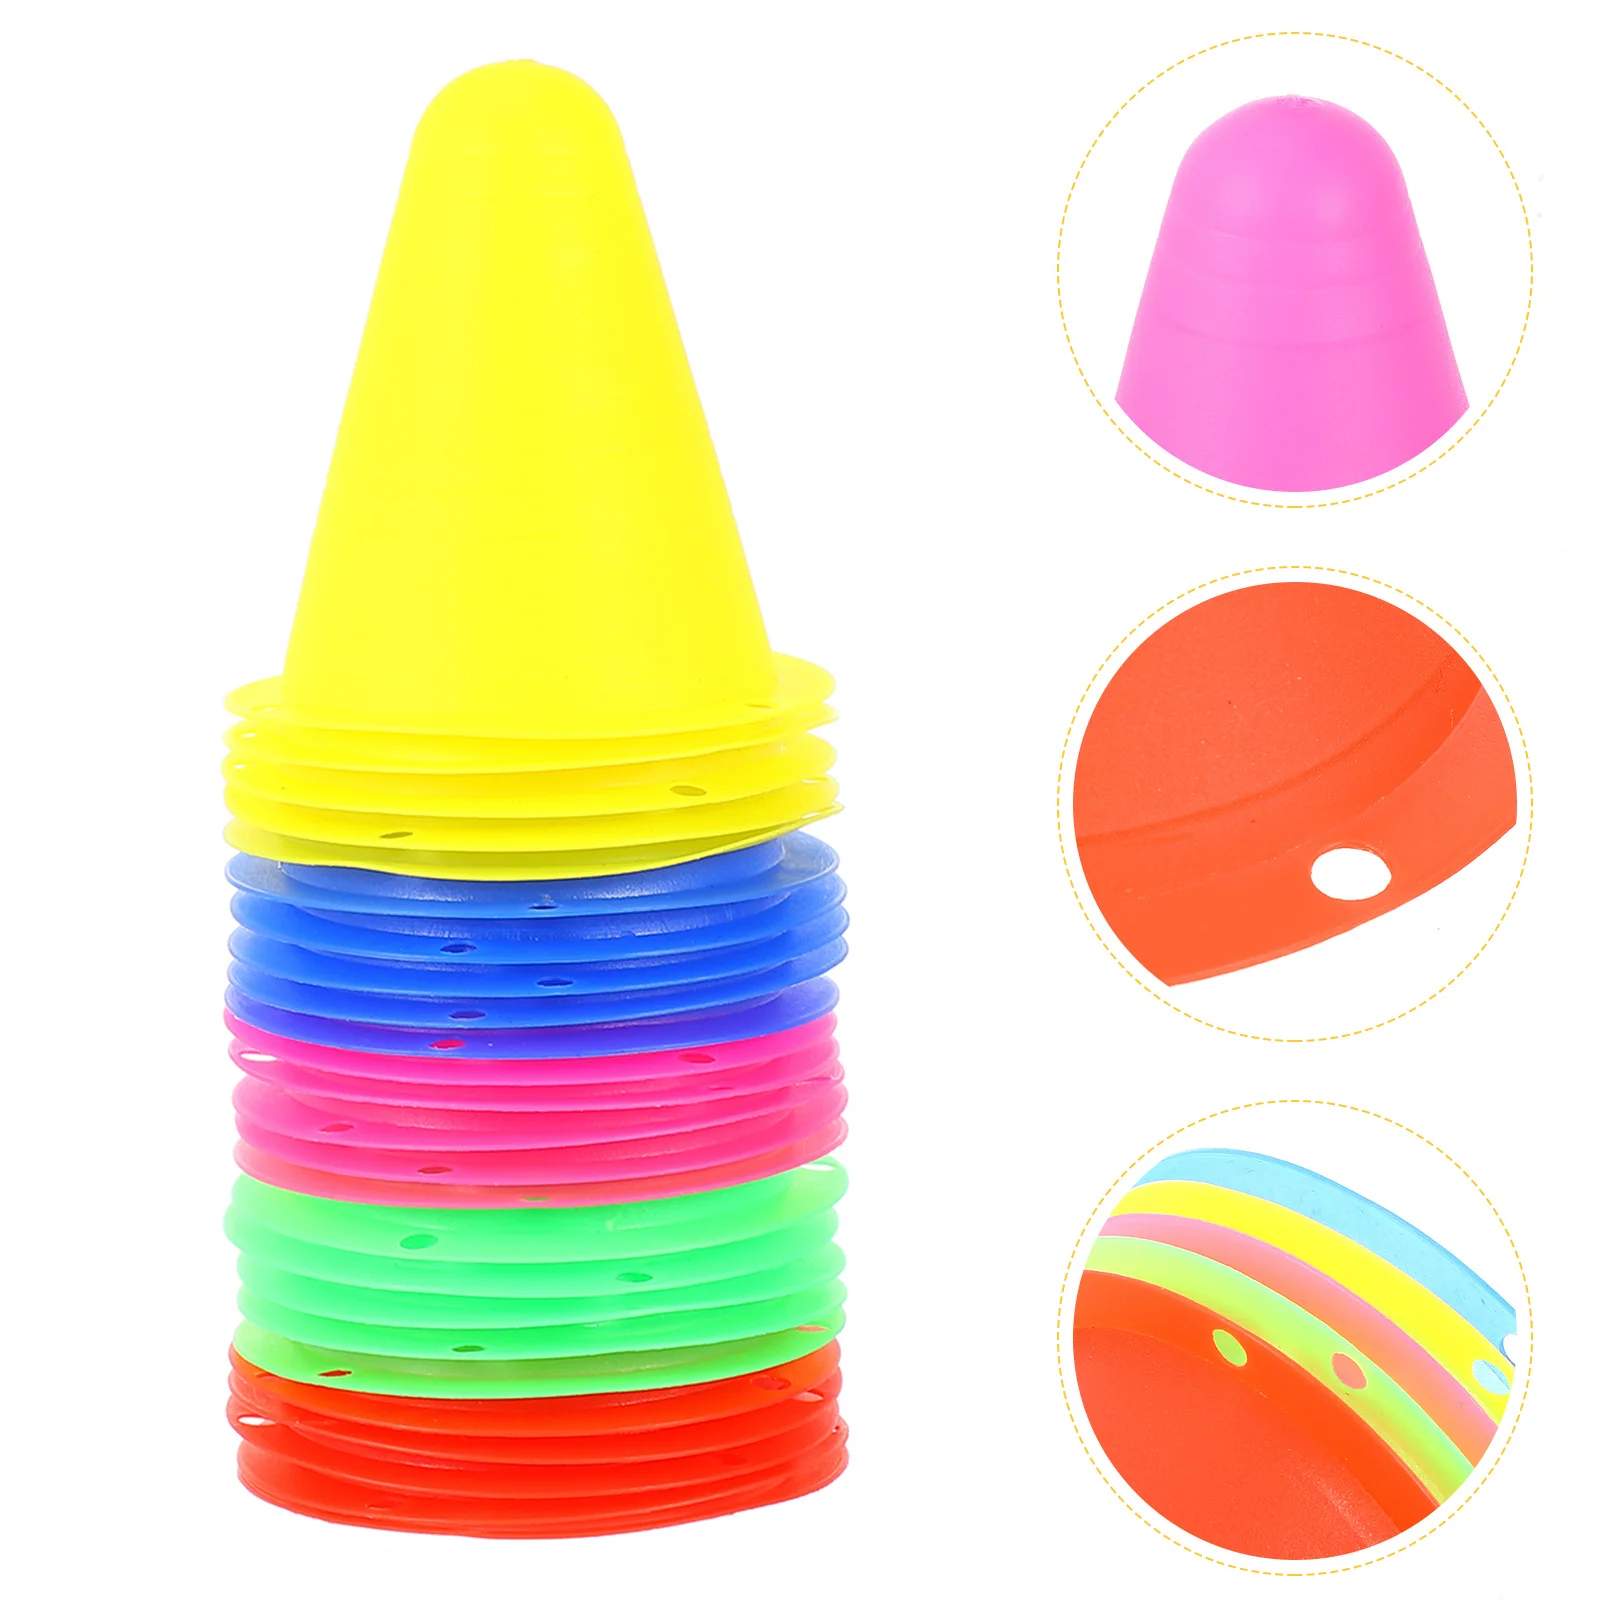 

Cones Soccer Training Cone Skating Agility Disc Marker Mini Practice Roller Football Roadblock Traffic Cup Kids Discs Fitness